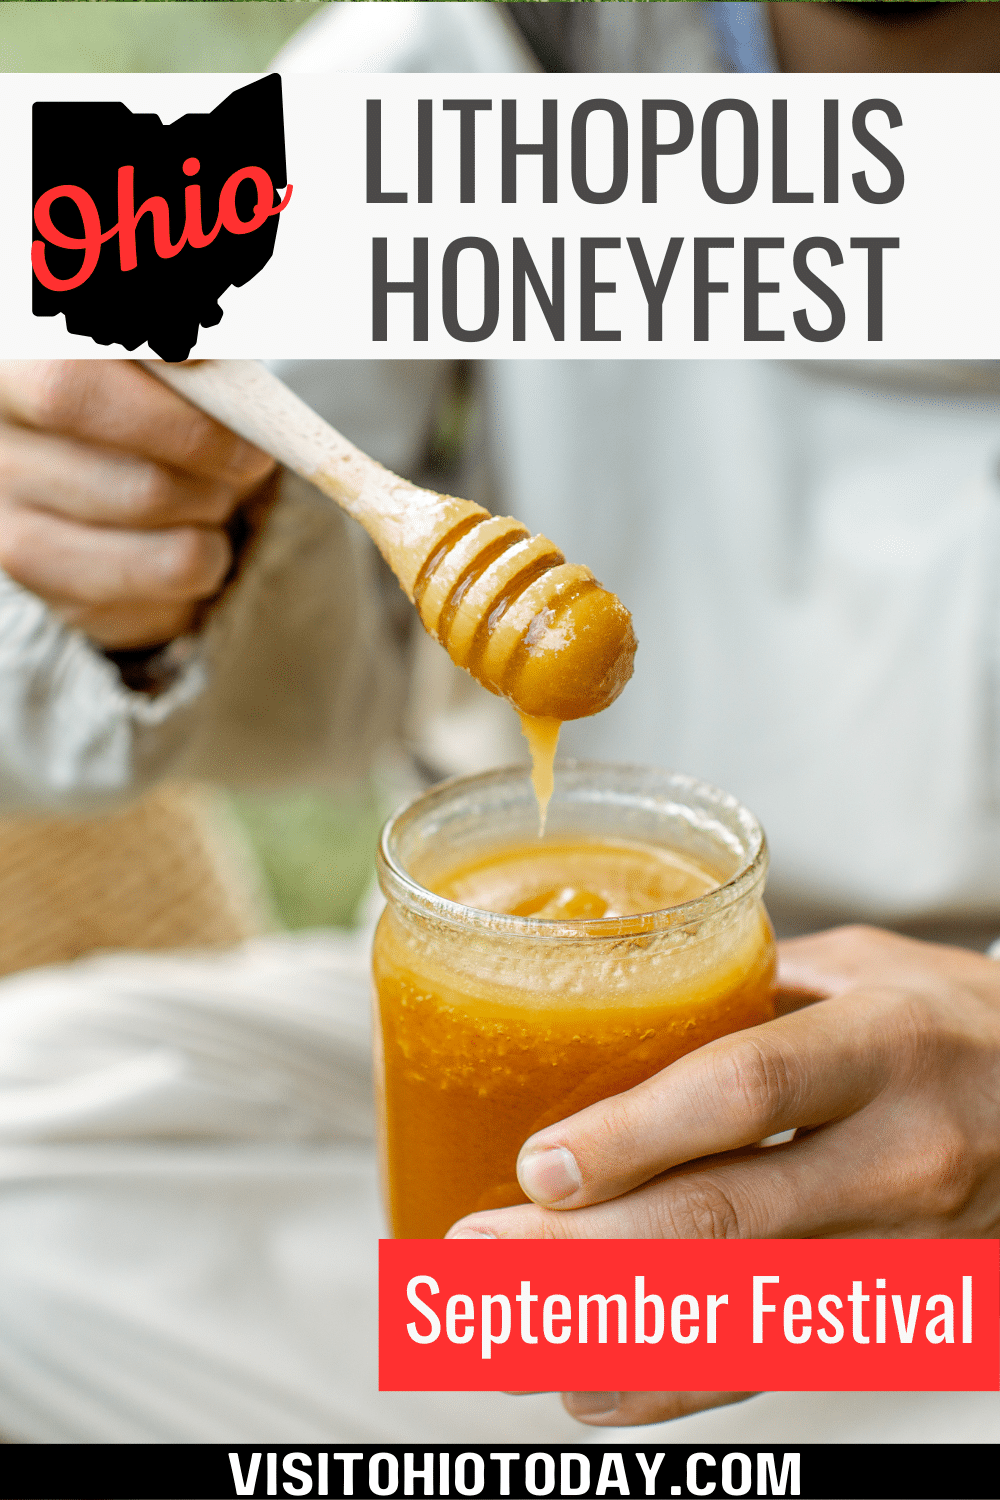 Lithopolis Honeyfest: A captivating September event celebrating beekeeping, honey bees, and honey, preserving and promoting beekeeping in Ohio and beyond.